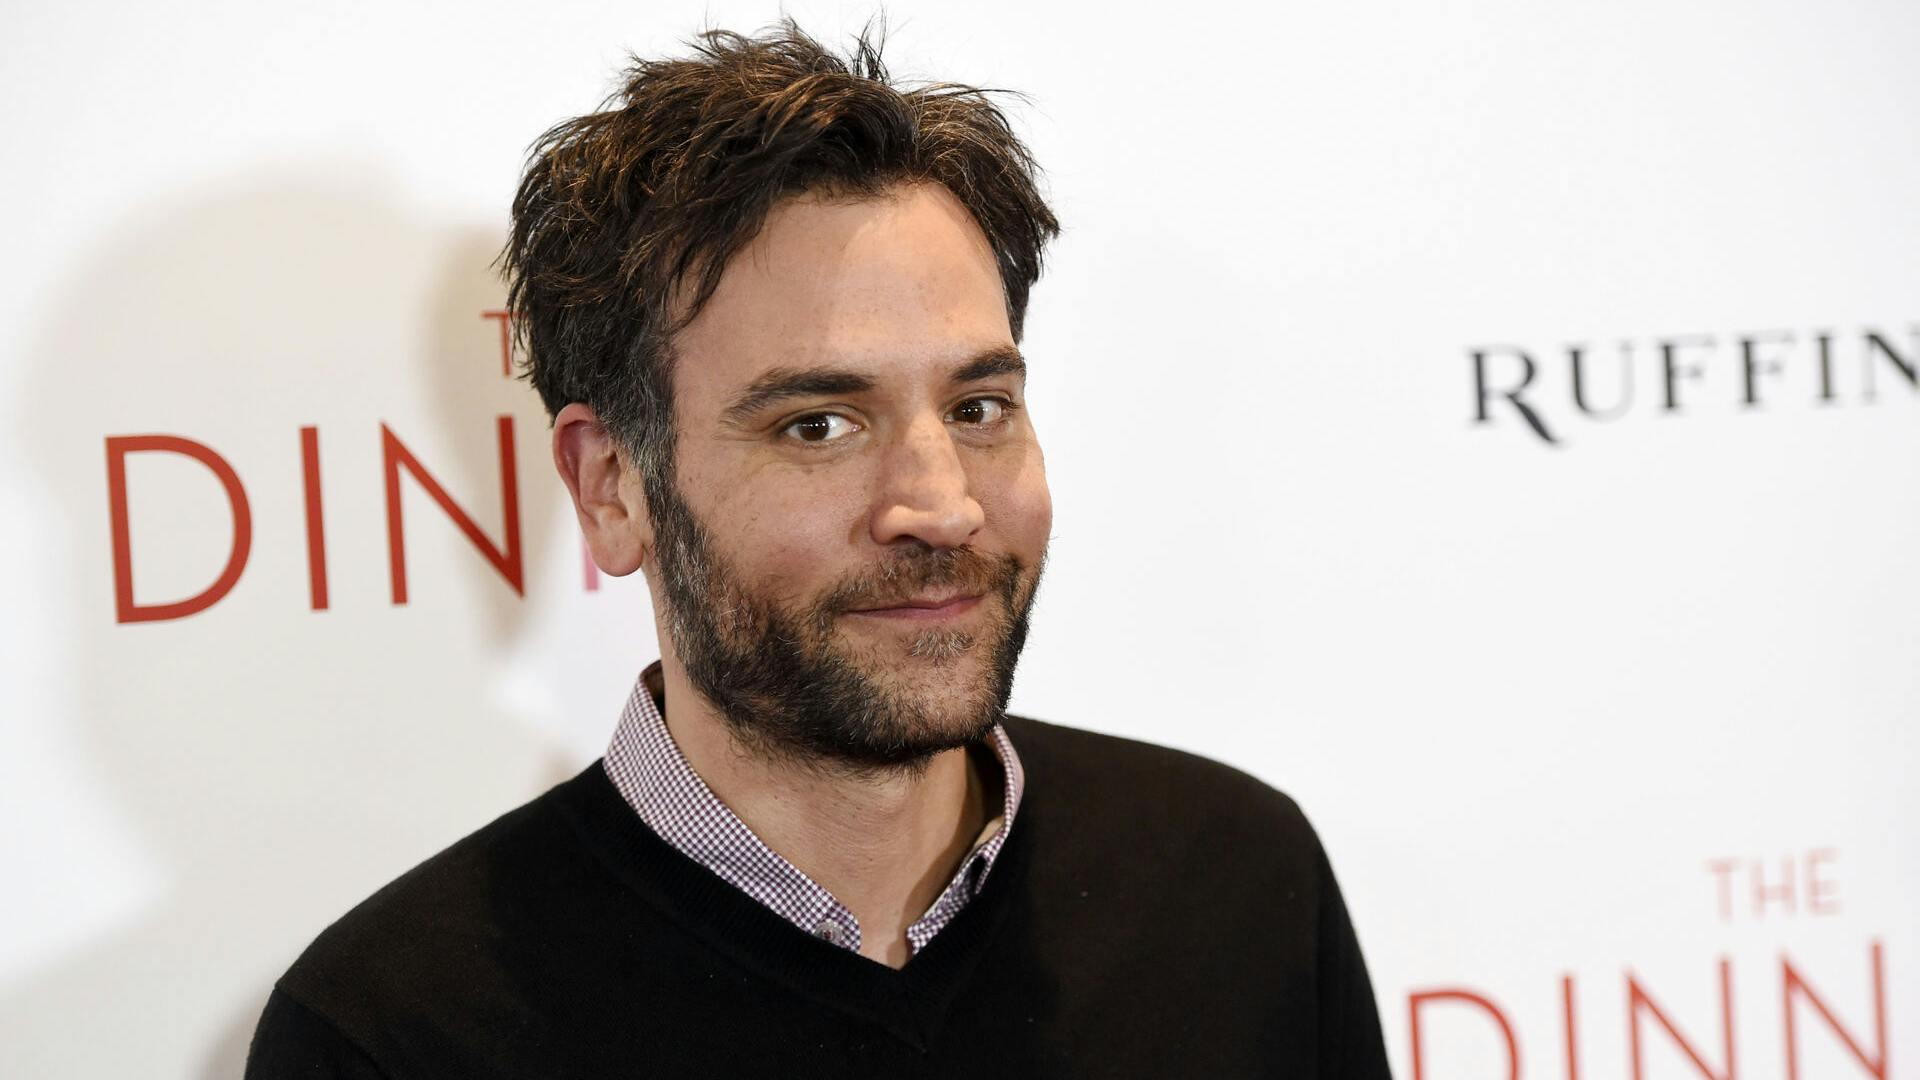 Actor/director Josh Radnor poses at the premiere of the film "The Dinner" at the Writers Guild Theater on Monday, May 1, 2017, in Beverly Hills, Calif. (Photo by Chris Pizzello/Invision/AP)